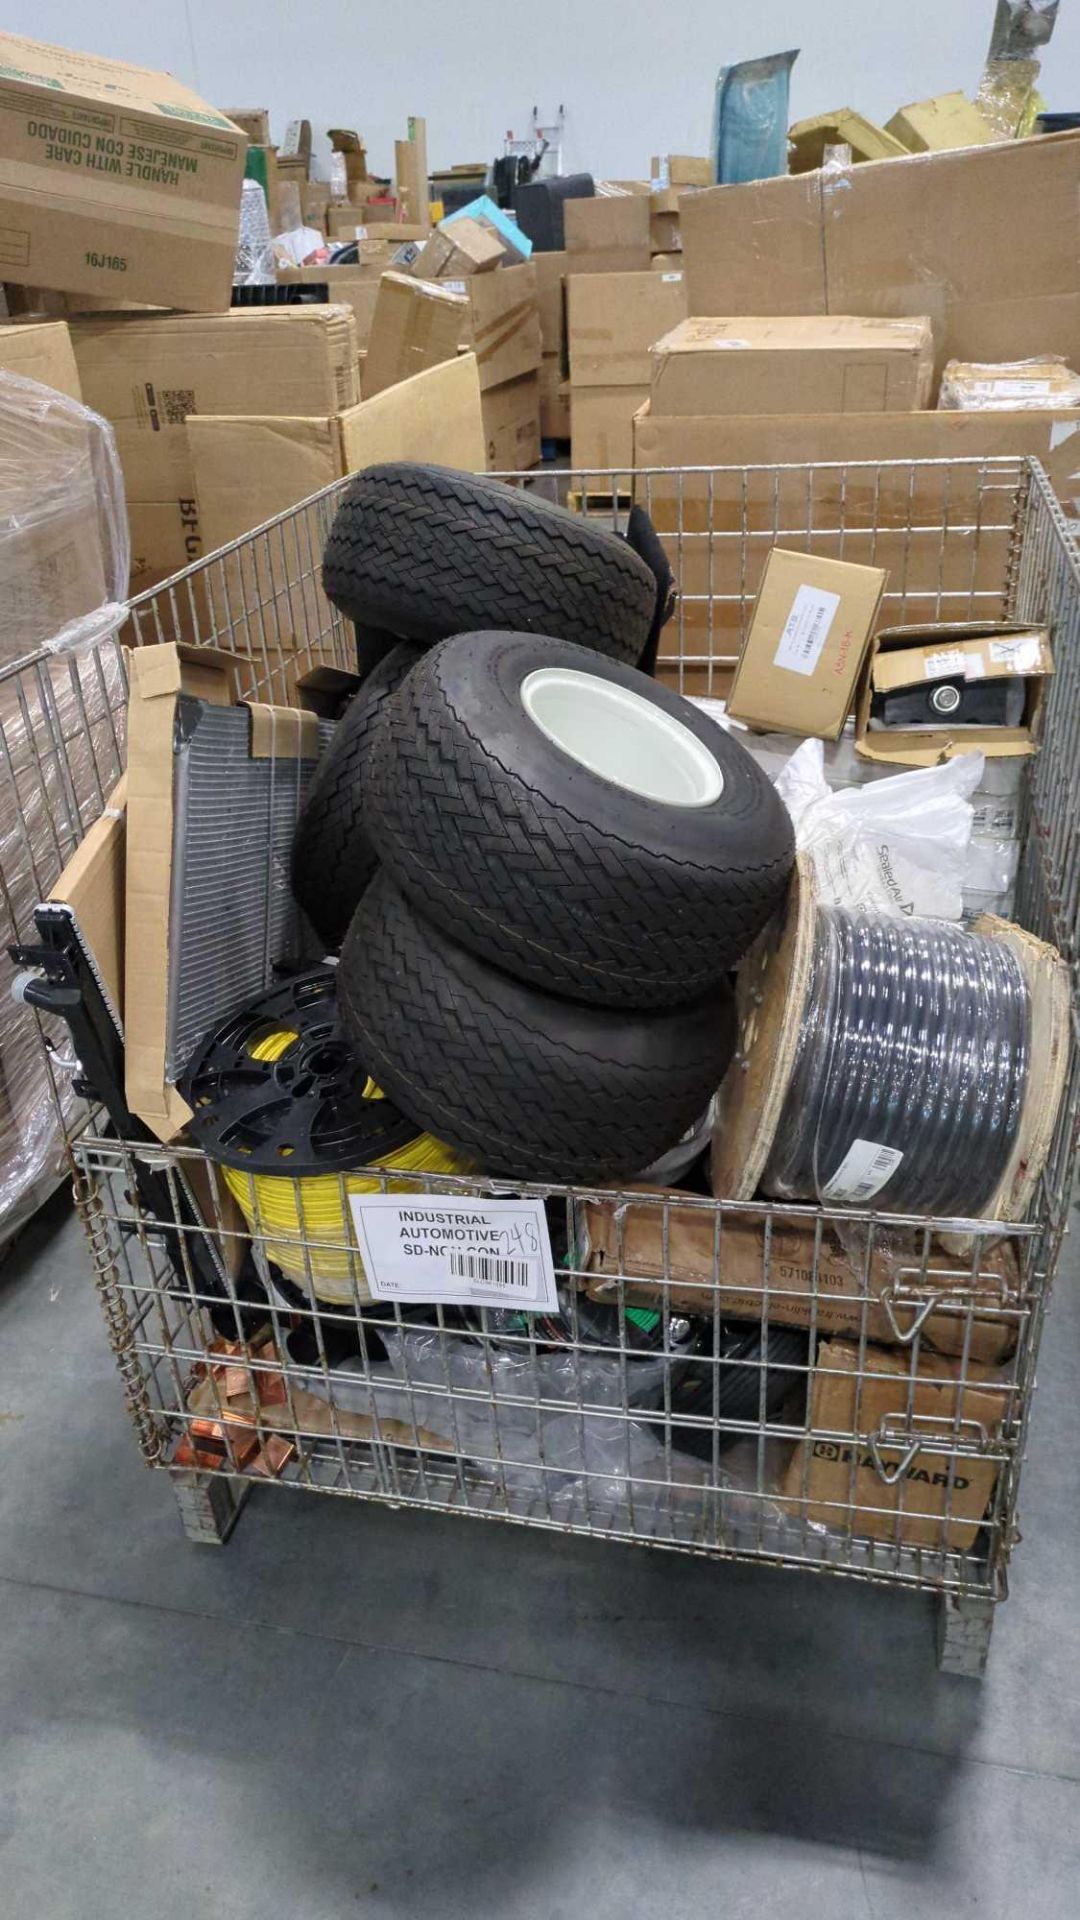 Wire bin- Tires, romex wire, Hayward, Car parts, radiators and more - Image 5 of 6